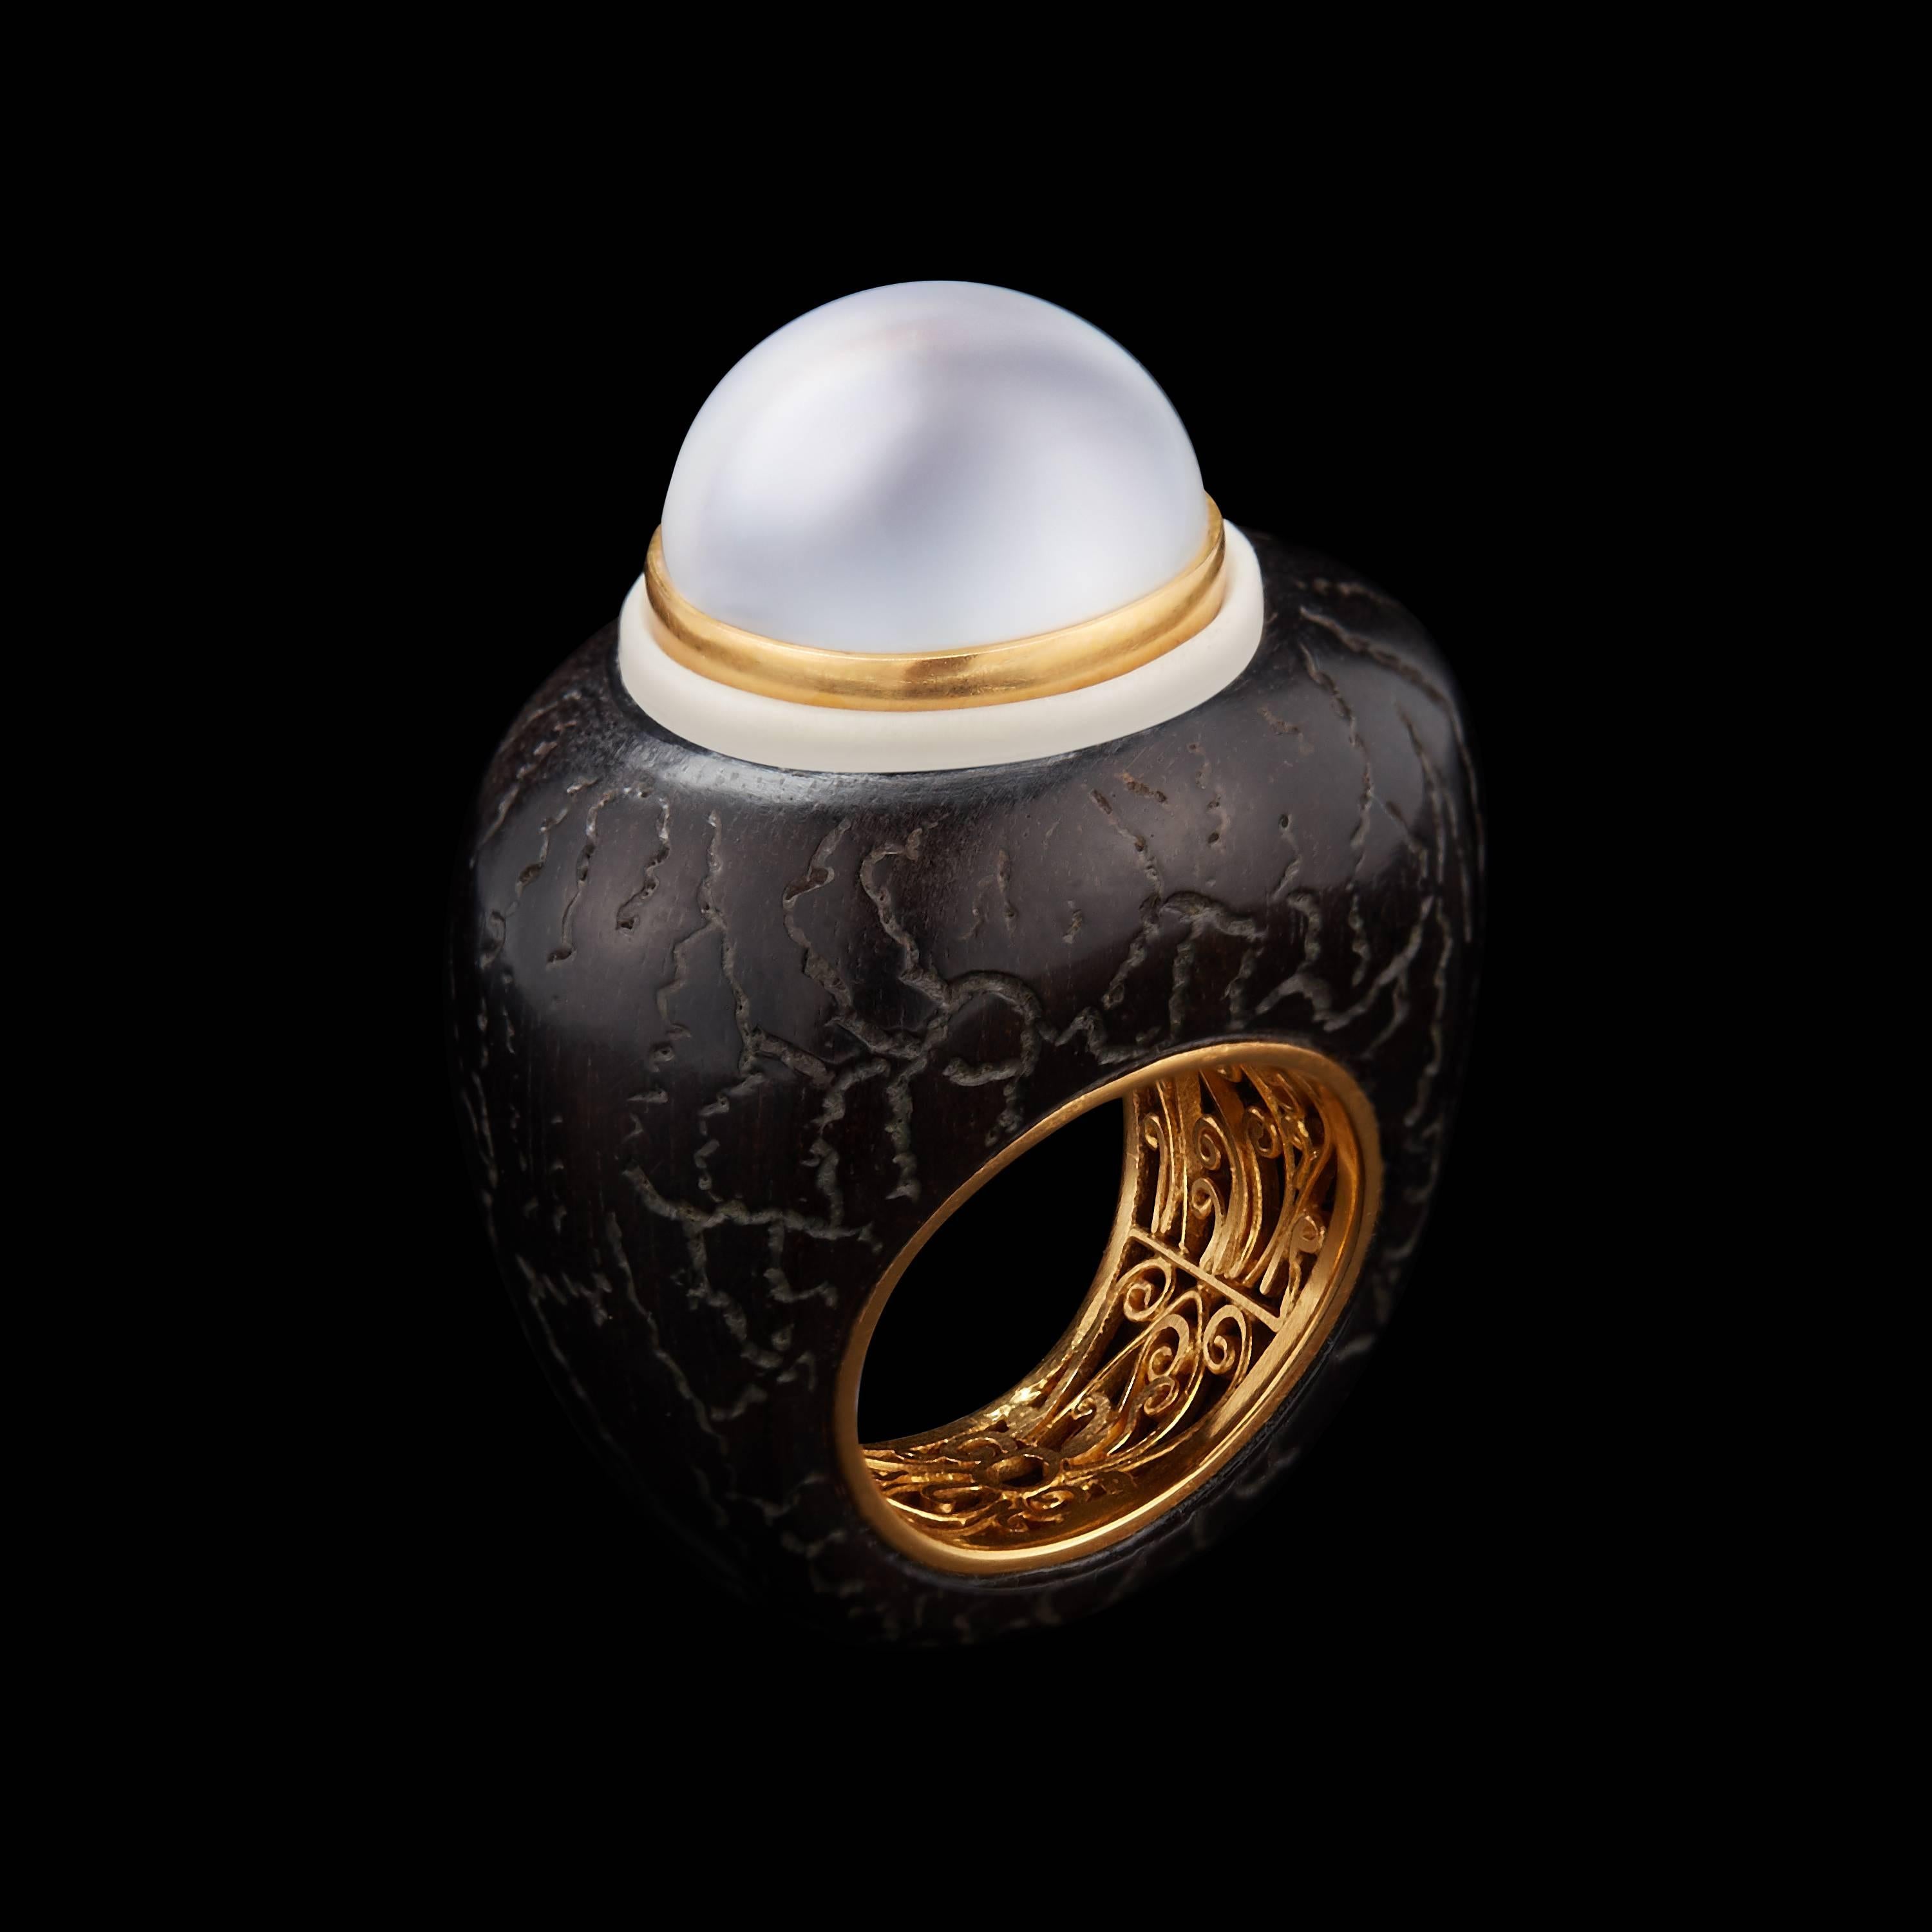 *Please contact us for more information on this piece or on creating your own Alexandra Mor custom Design. 

This Alexandra Mor ring features a 16.74mm white Baroque South Sea Pearl set in a 22 karat gold bezel accented with a carved, wild-harvested